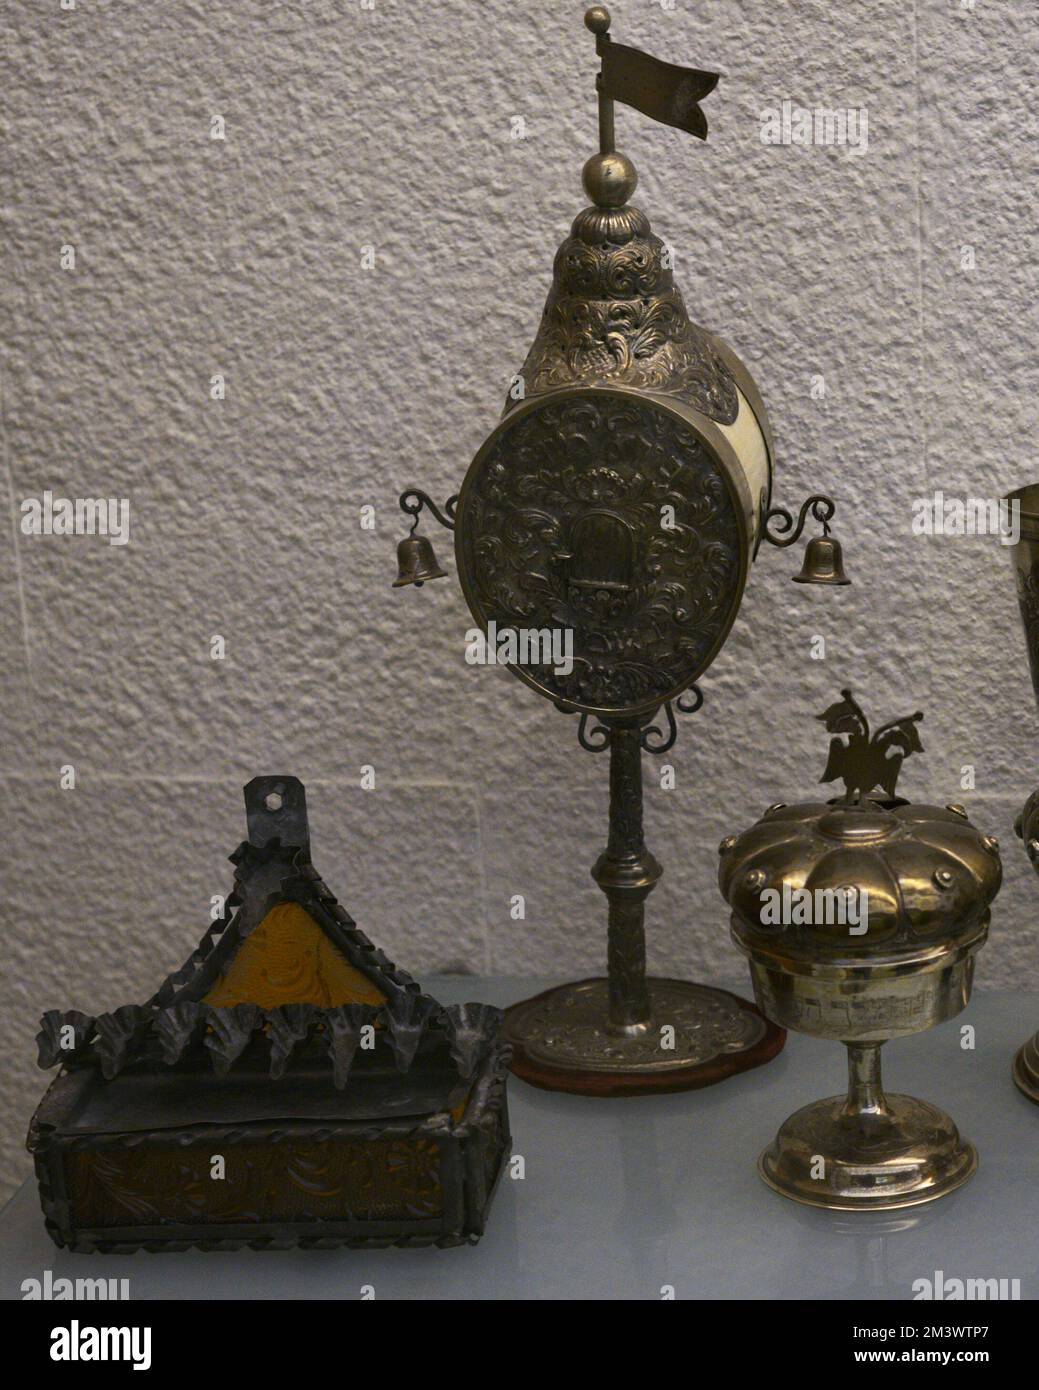 Left: lamp for the festival of Lights (Hanukkah). Late 19th century. Brass and glass. From Djerba (Tunisia). Center: perfumer for the Habdalah ceremony. 19th-20th centuries. Silver and ivory, inscriptions in Hebrew. From Central Europe. Right: Kiddush cup for the Sabbath feast with lid and spice container. Hebrew inscriptions. 20th century. Silver. From Central Europe. Sephardic Museum. Toledo. Castile-La Mancha. Spain. Stock Photo